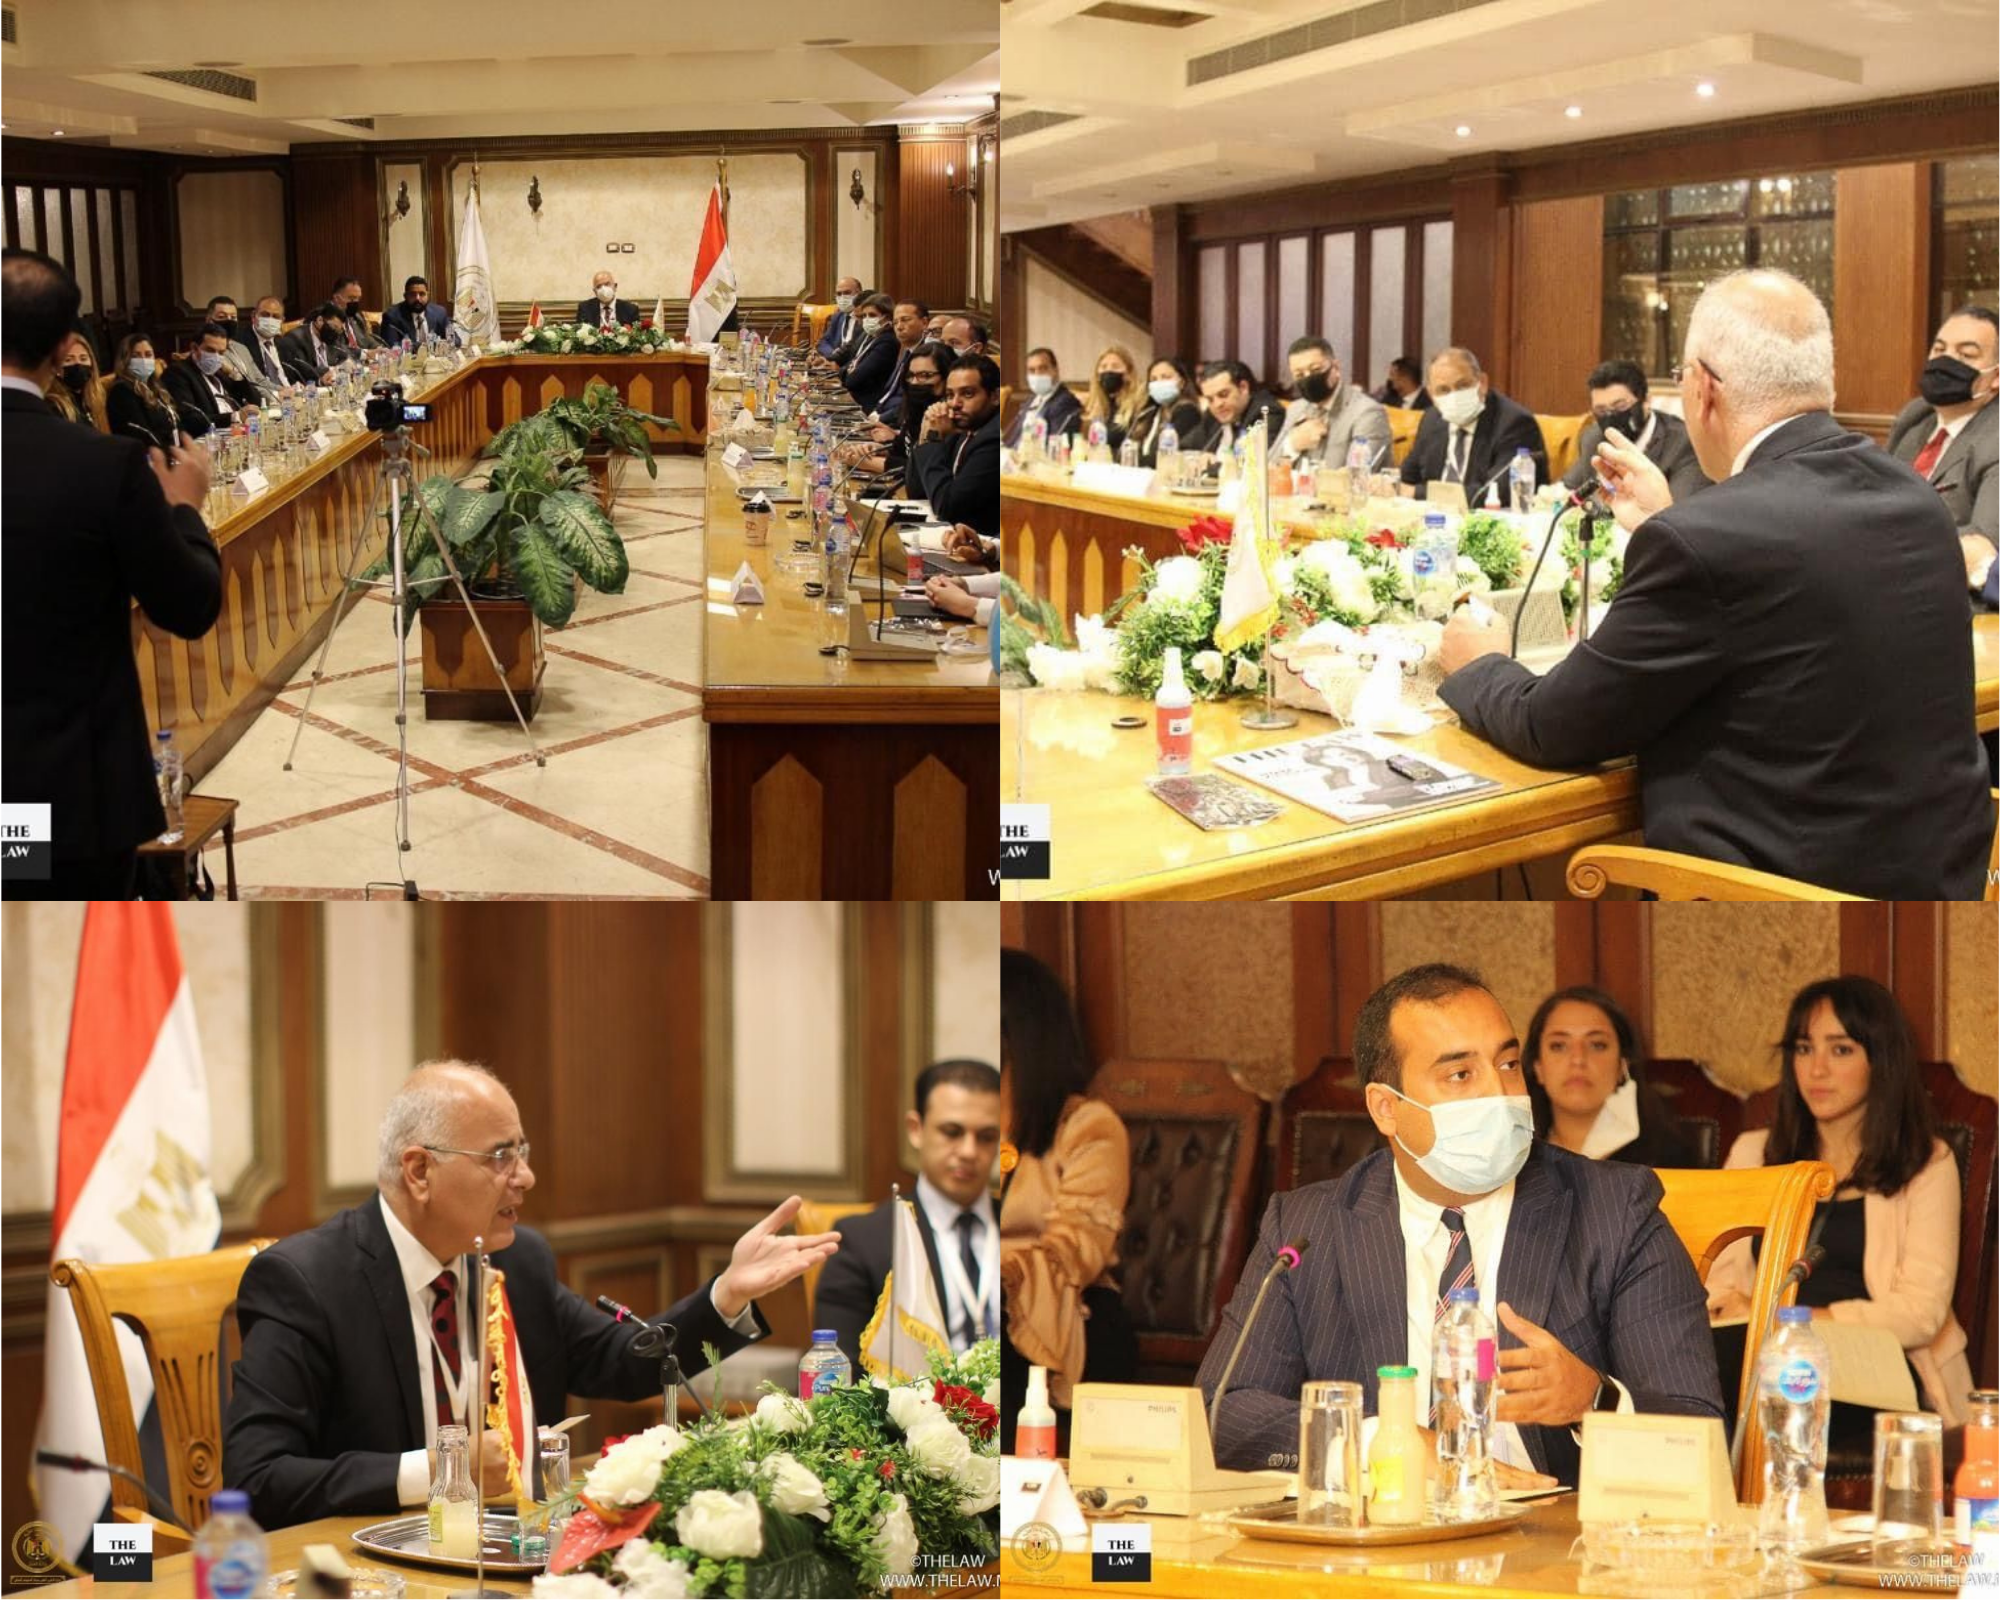 You are currently viewing Muhammad Ussama, partner at Shalakany, attended a round-table discussion organized by the Ministry of Justice and The Law regarding the digitalization of judicial proceedings in Egypt